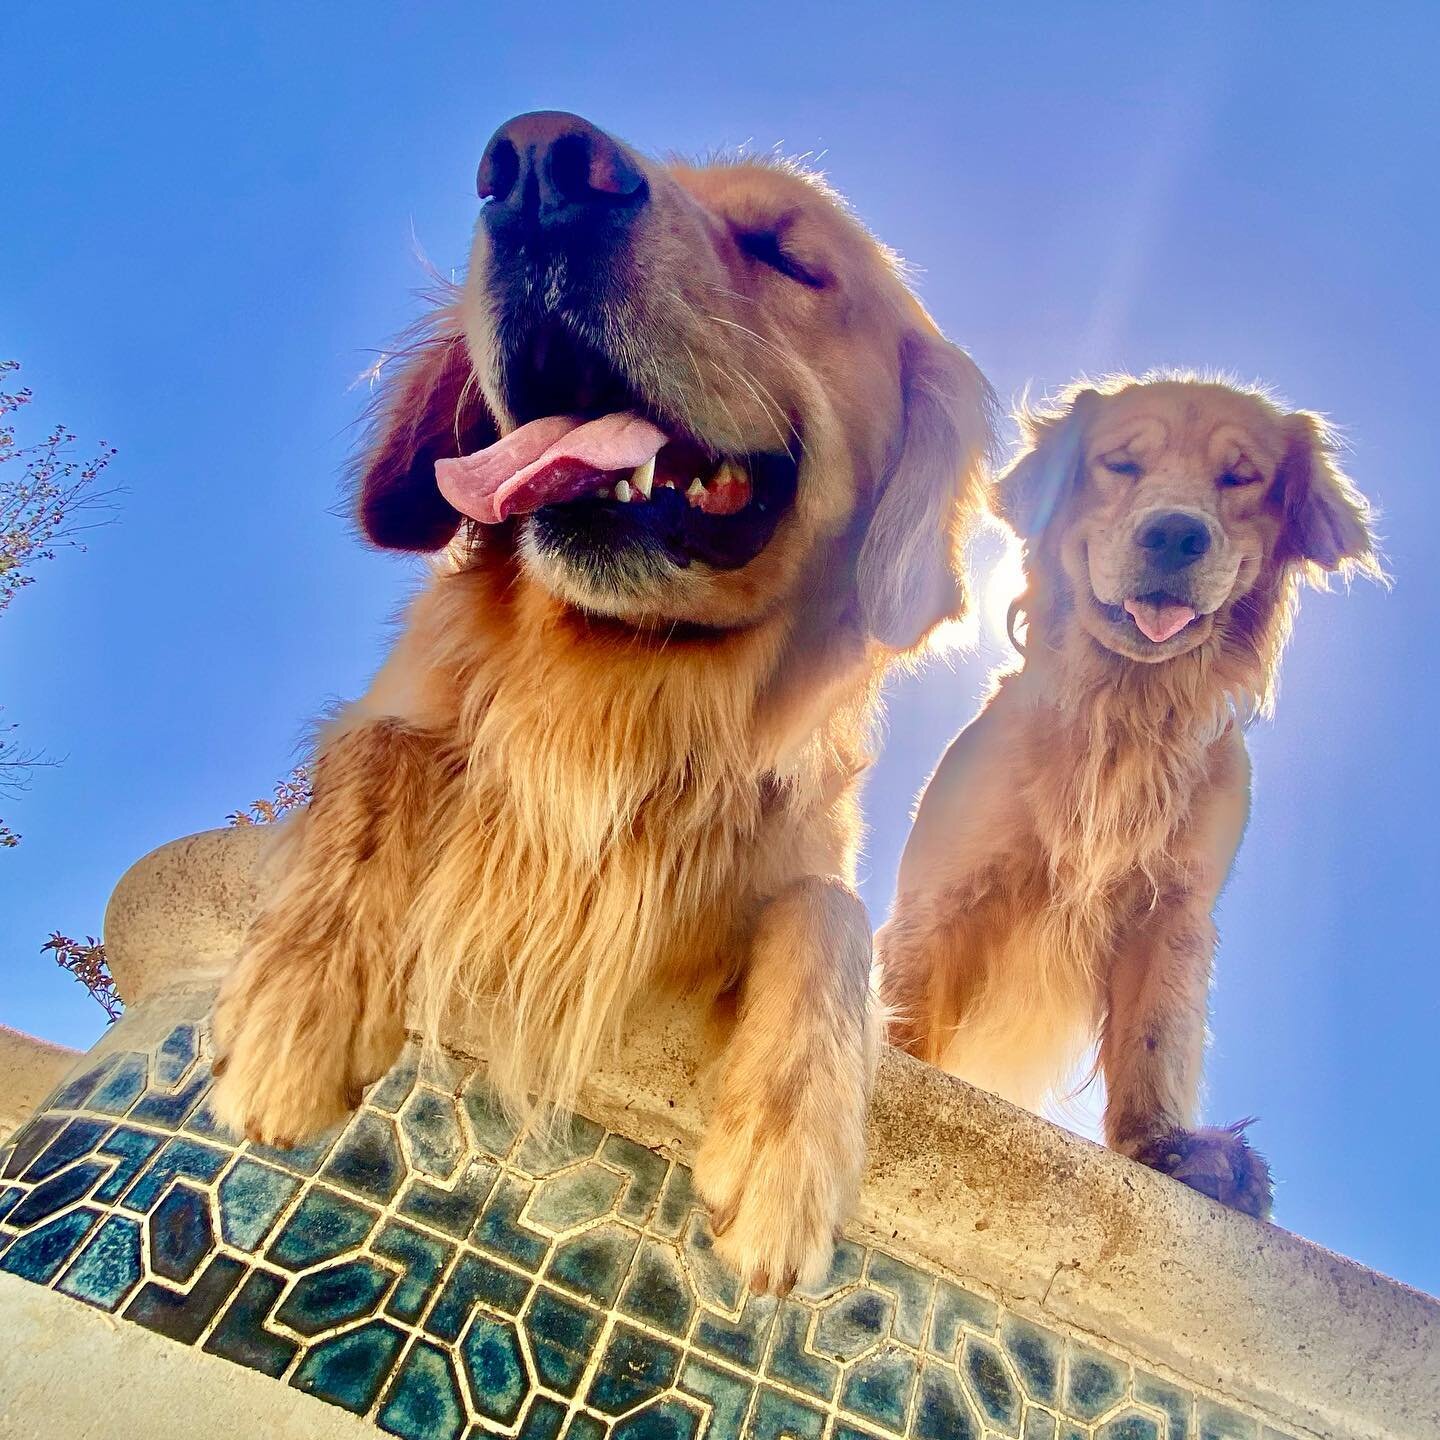 Calvin and Bodie chillin poolside

#goldenretriever #goldenretrieversofinstagram #goldenretrievers #goldenretrieverpuppies #littermates #brothers #dog #dogsofinstagram #dogs #dogsofinsta #doggy #doggo #doggos #pool #poolside #vibes